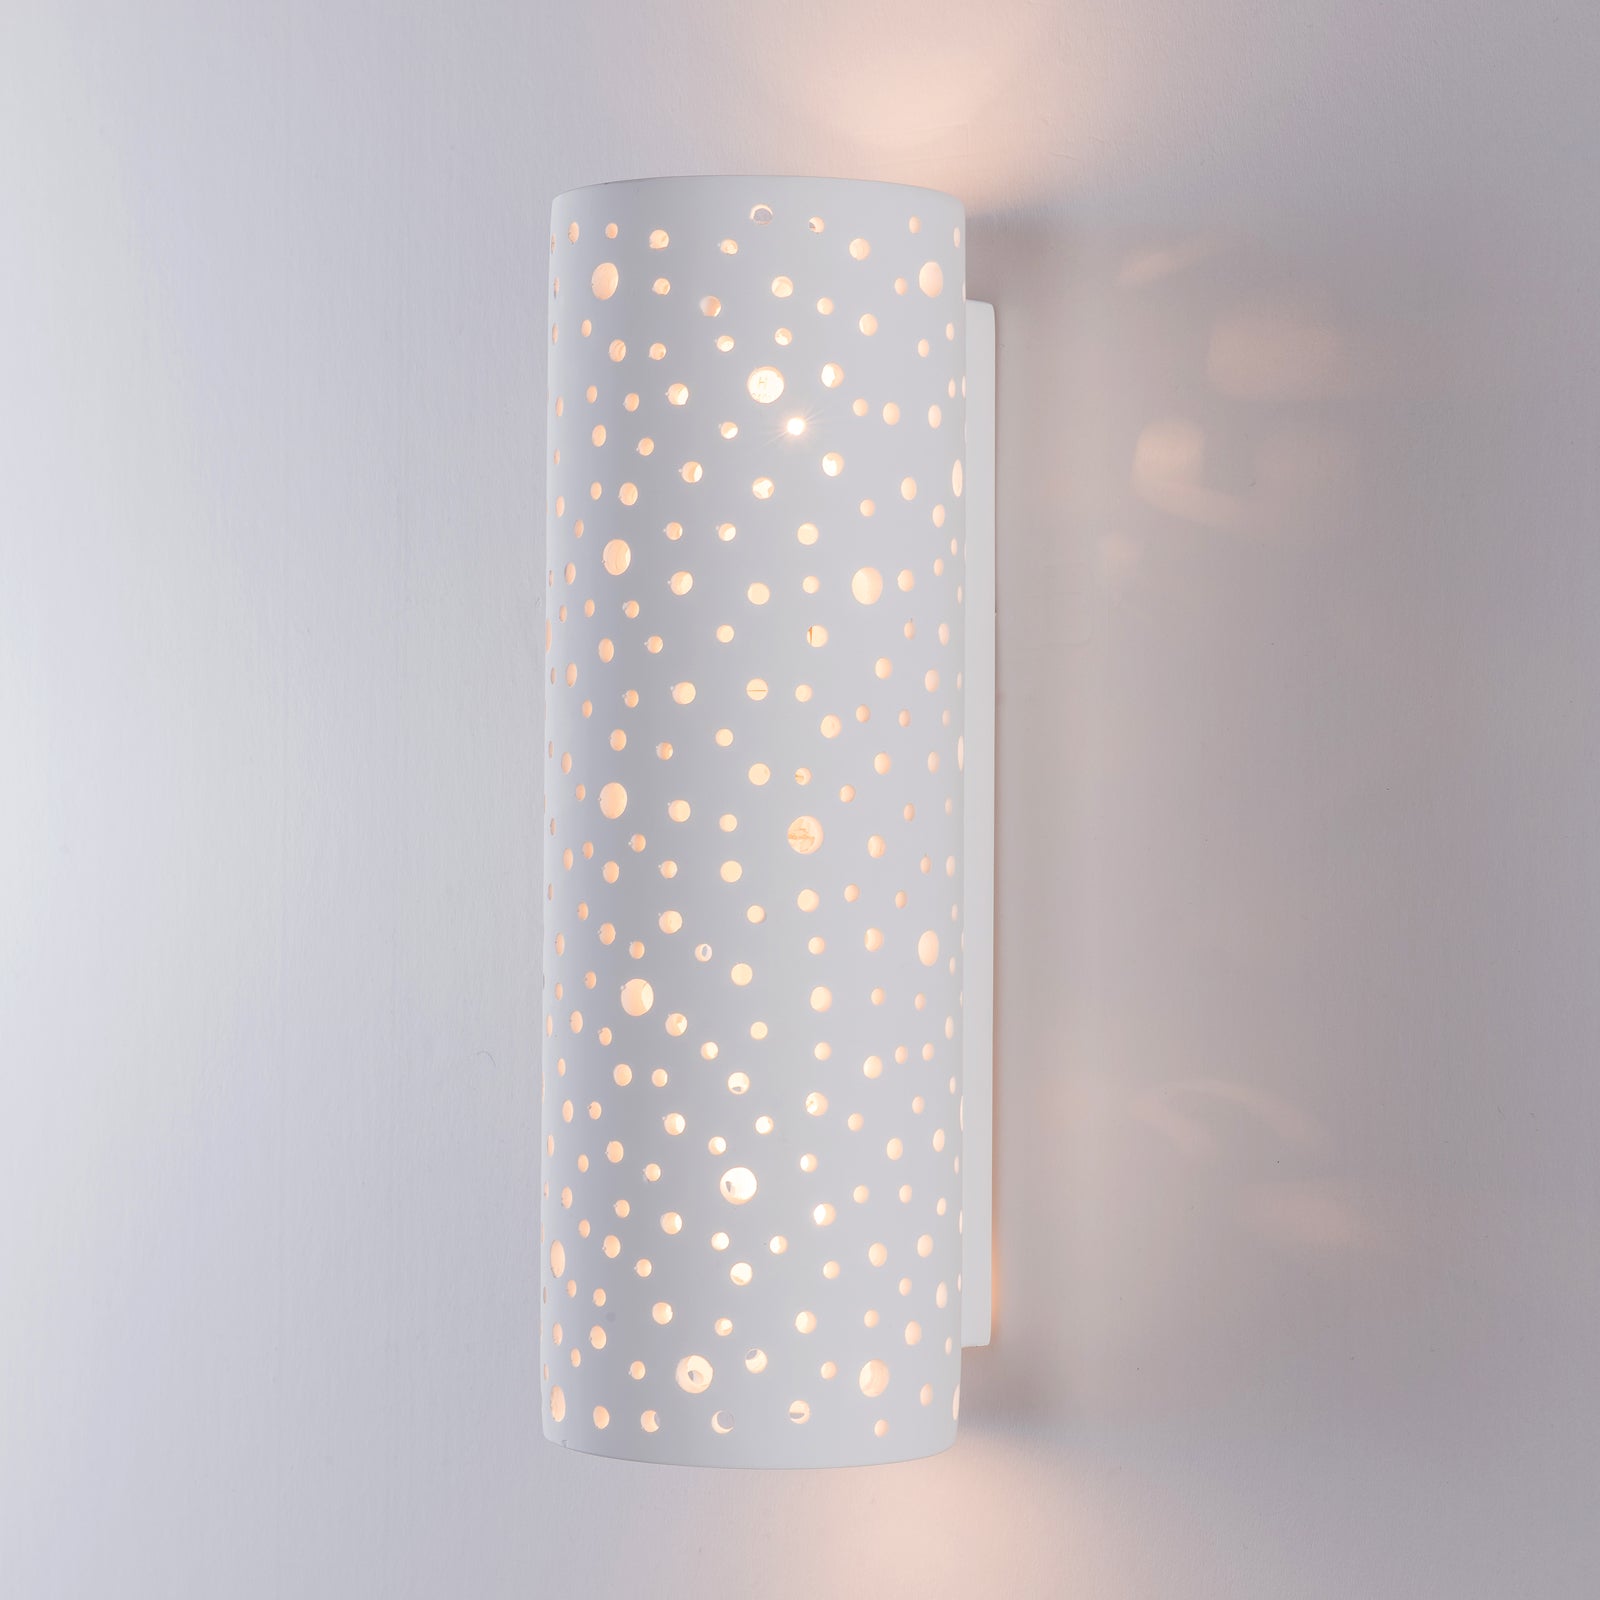 Perforated Up/Down Ceramic Wall Light, Cylinder Shade, 2xE14 Bulb Cap 40 Watts Maximum Each, White finish